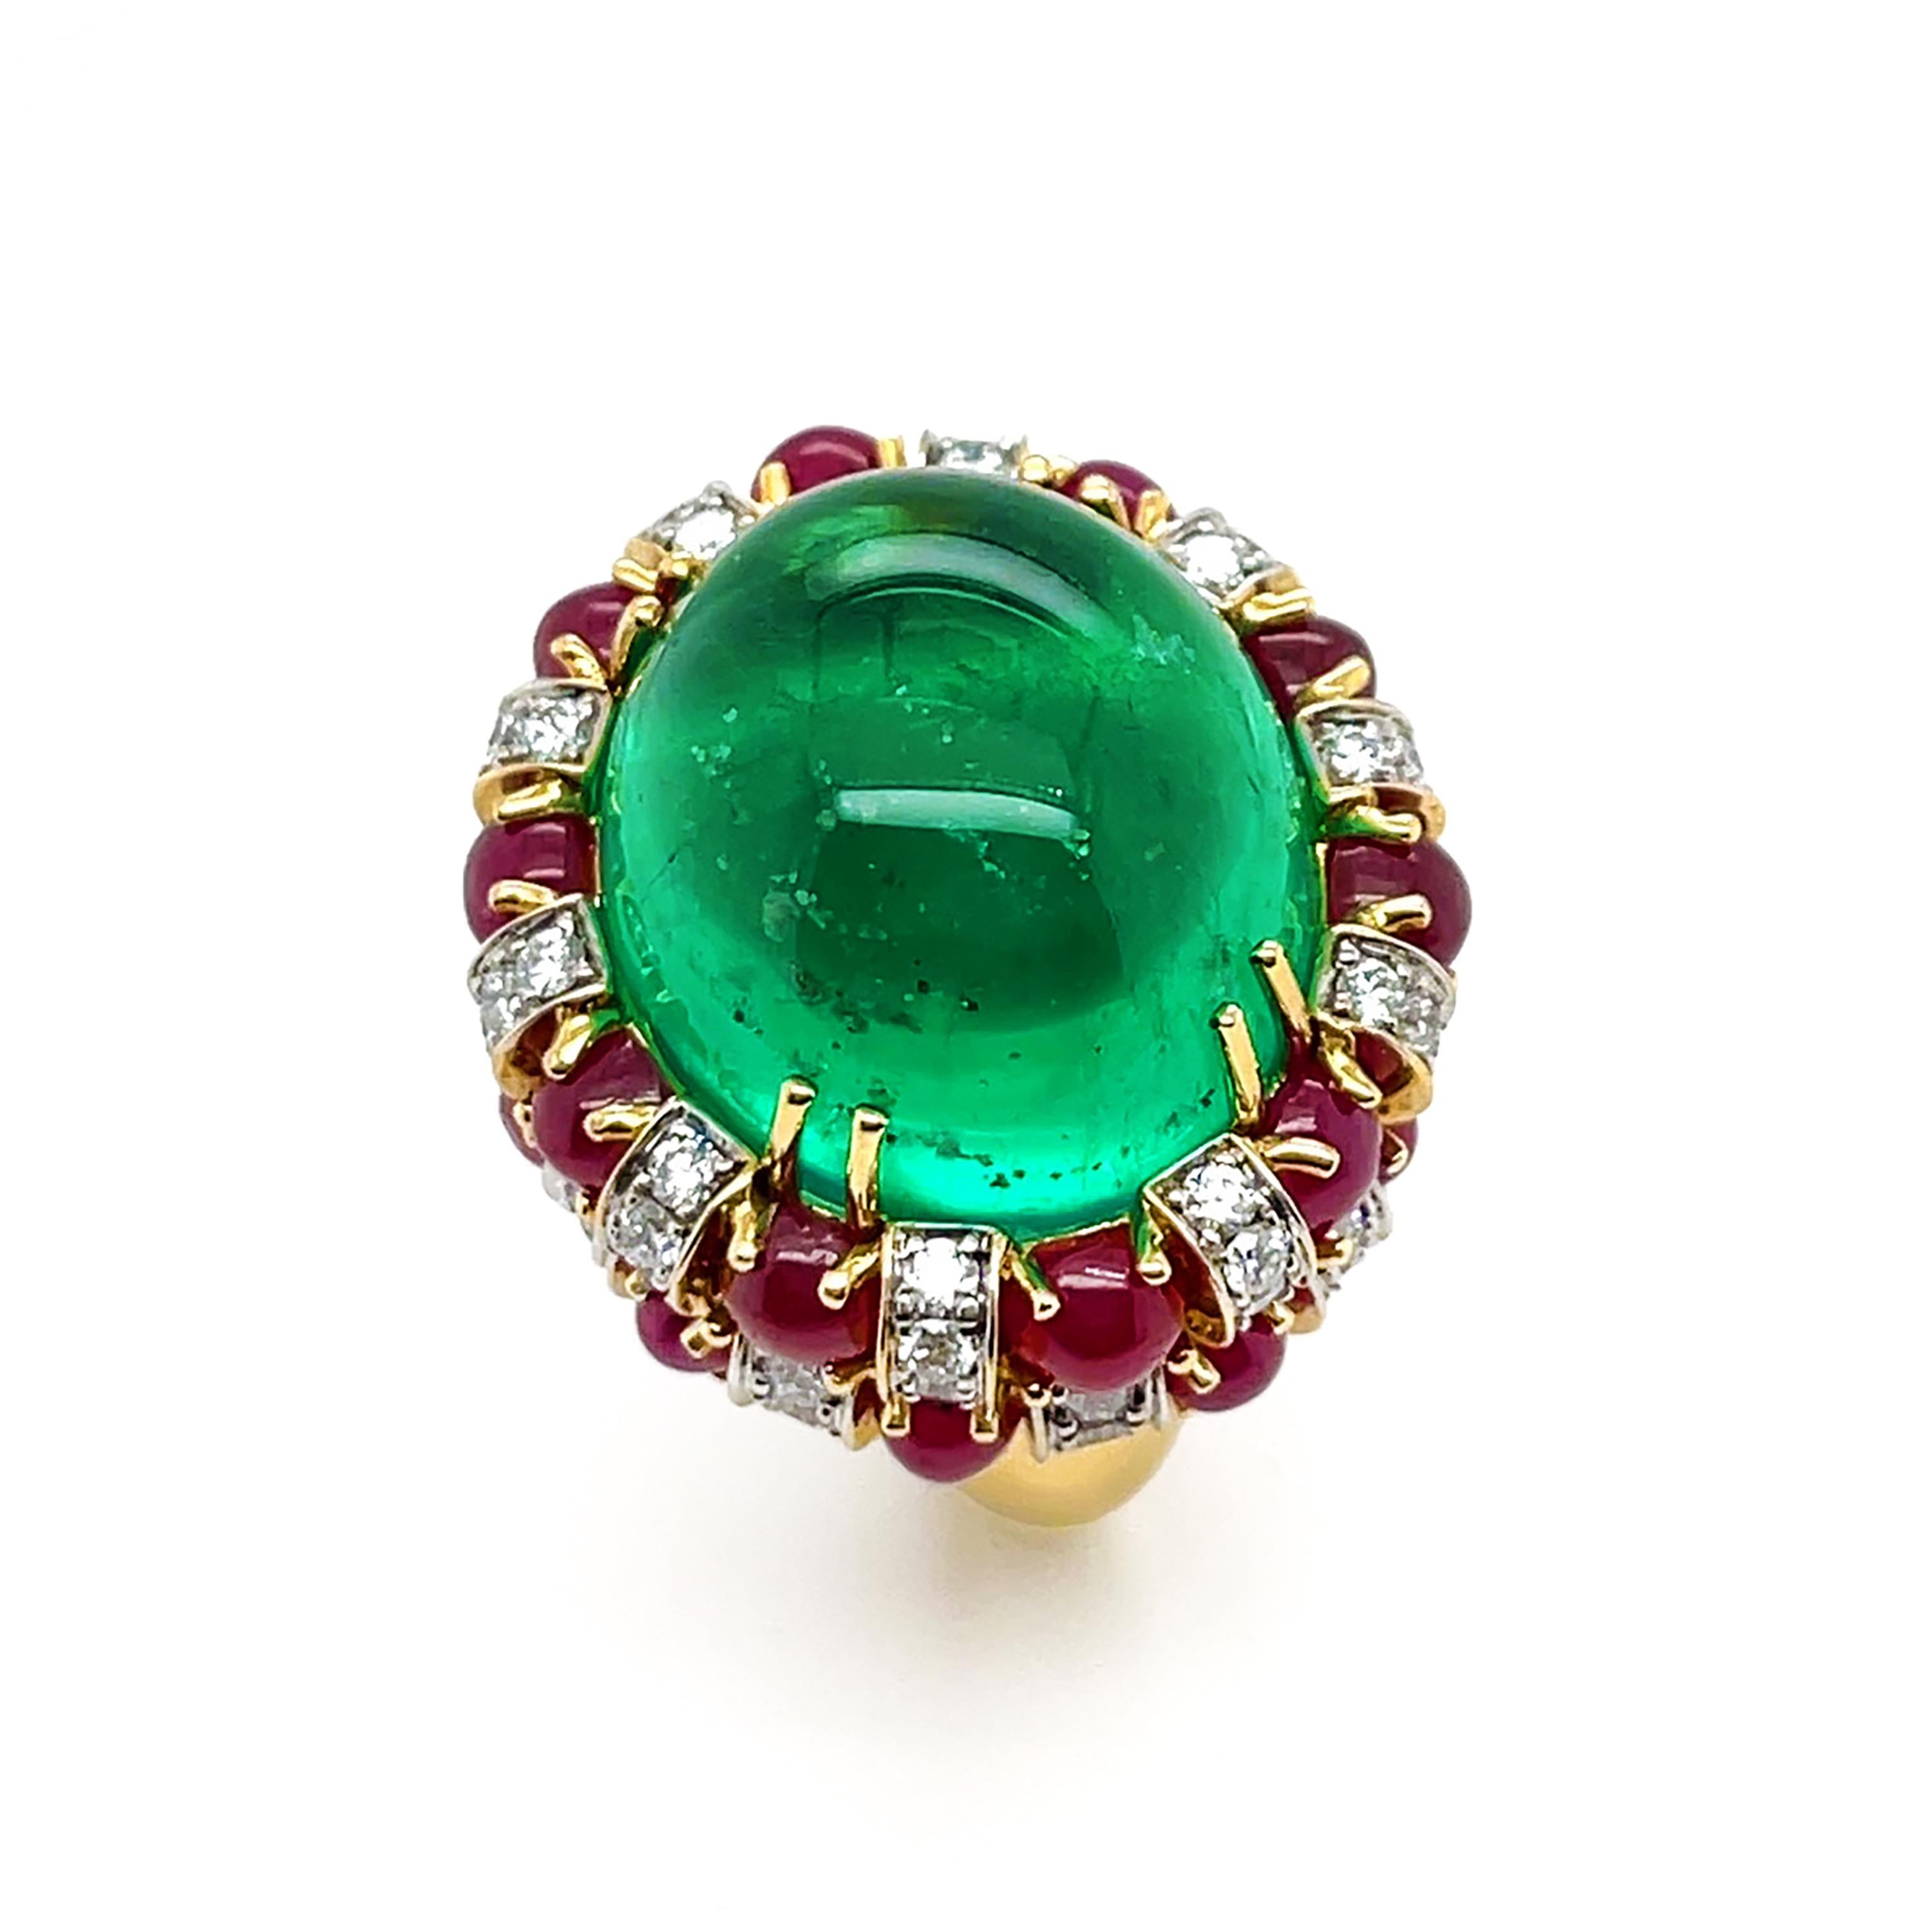 A precious emerald from Colombia is the heart of this ring. Secured in 18k yellow gold prongs, the raised oval cabochon displays its unique inclusions. Two rows of ruby cabochons and pave set diamonds revolve below the jewel for added elegance. The